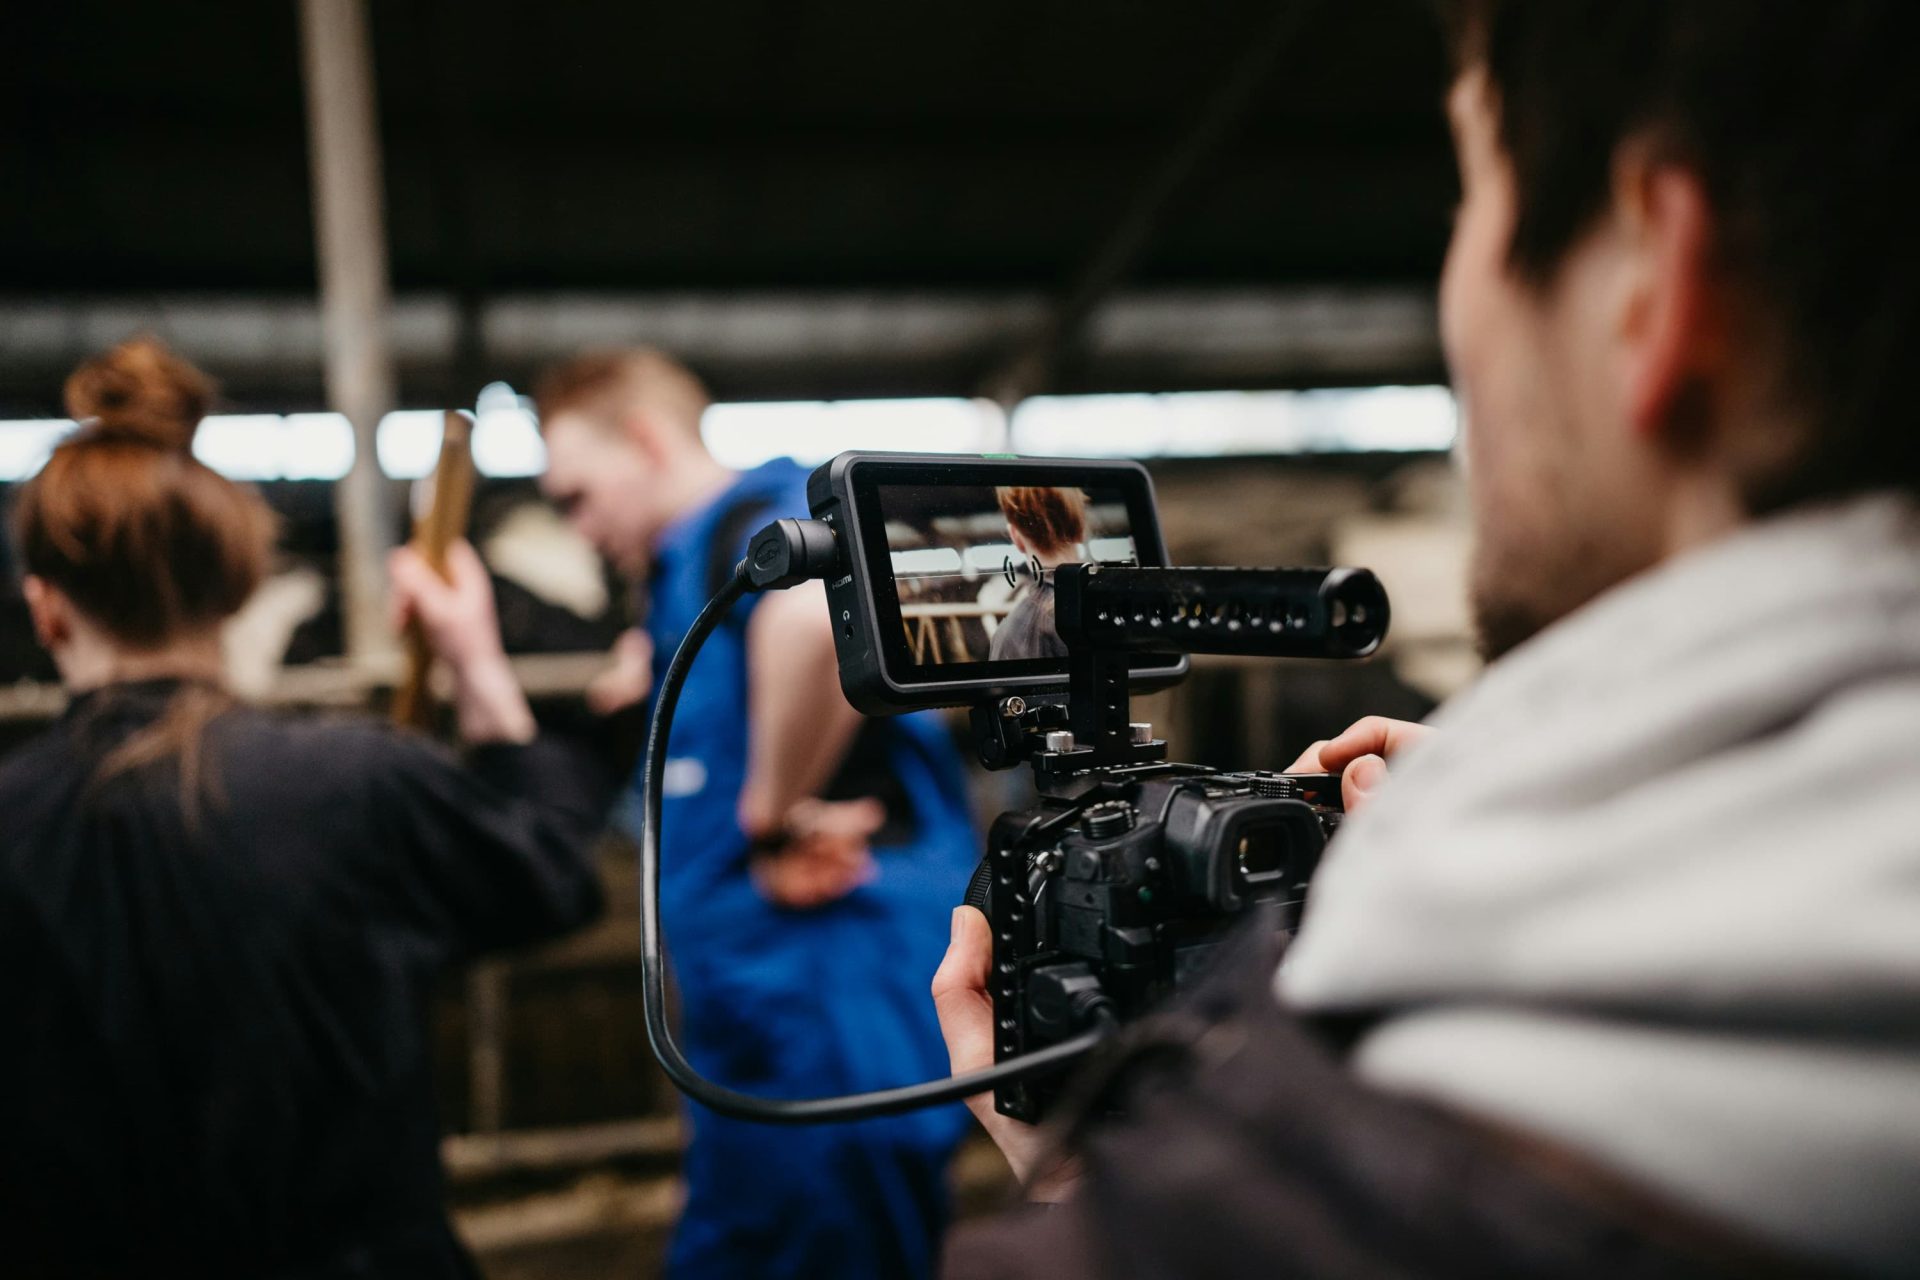 brand web video production using a professional video camera